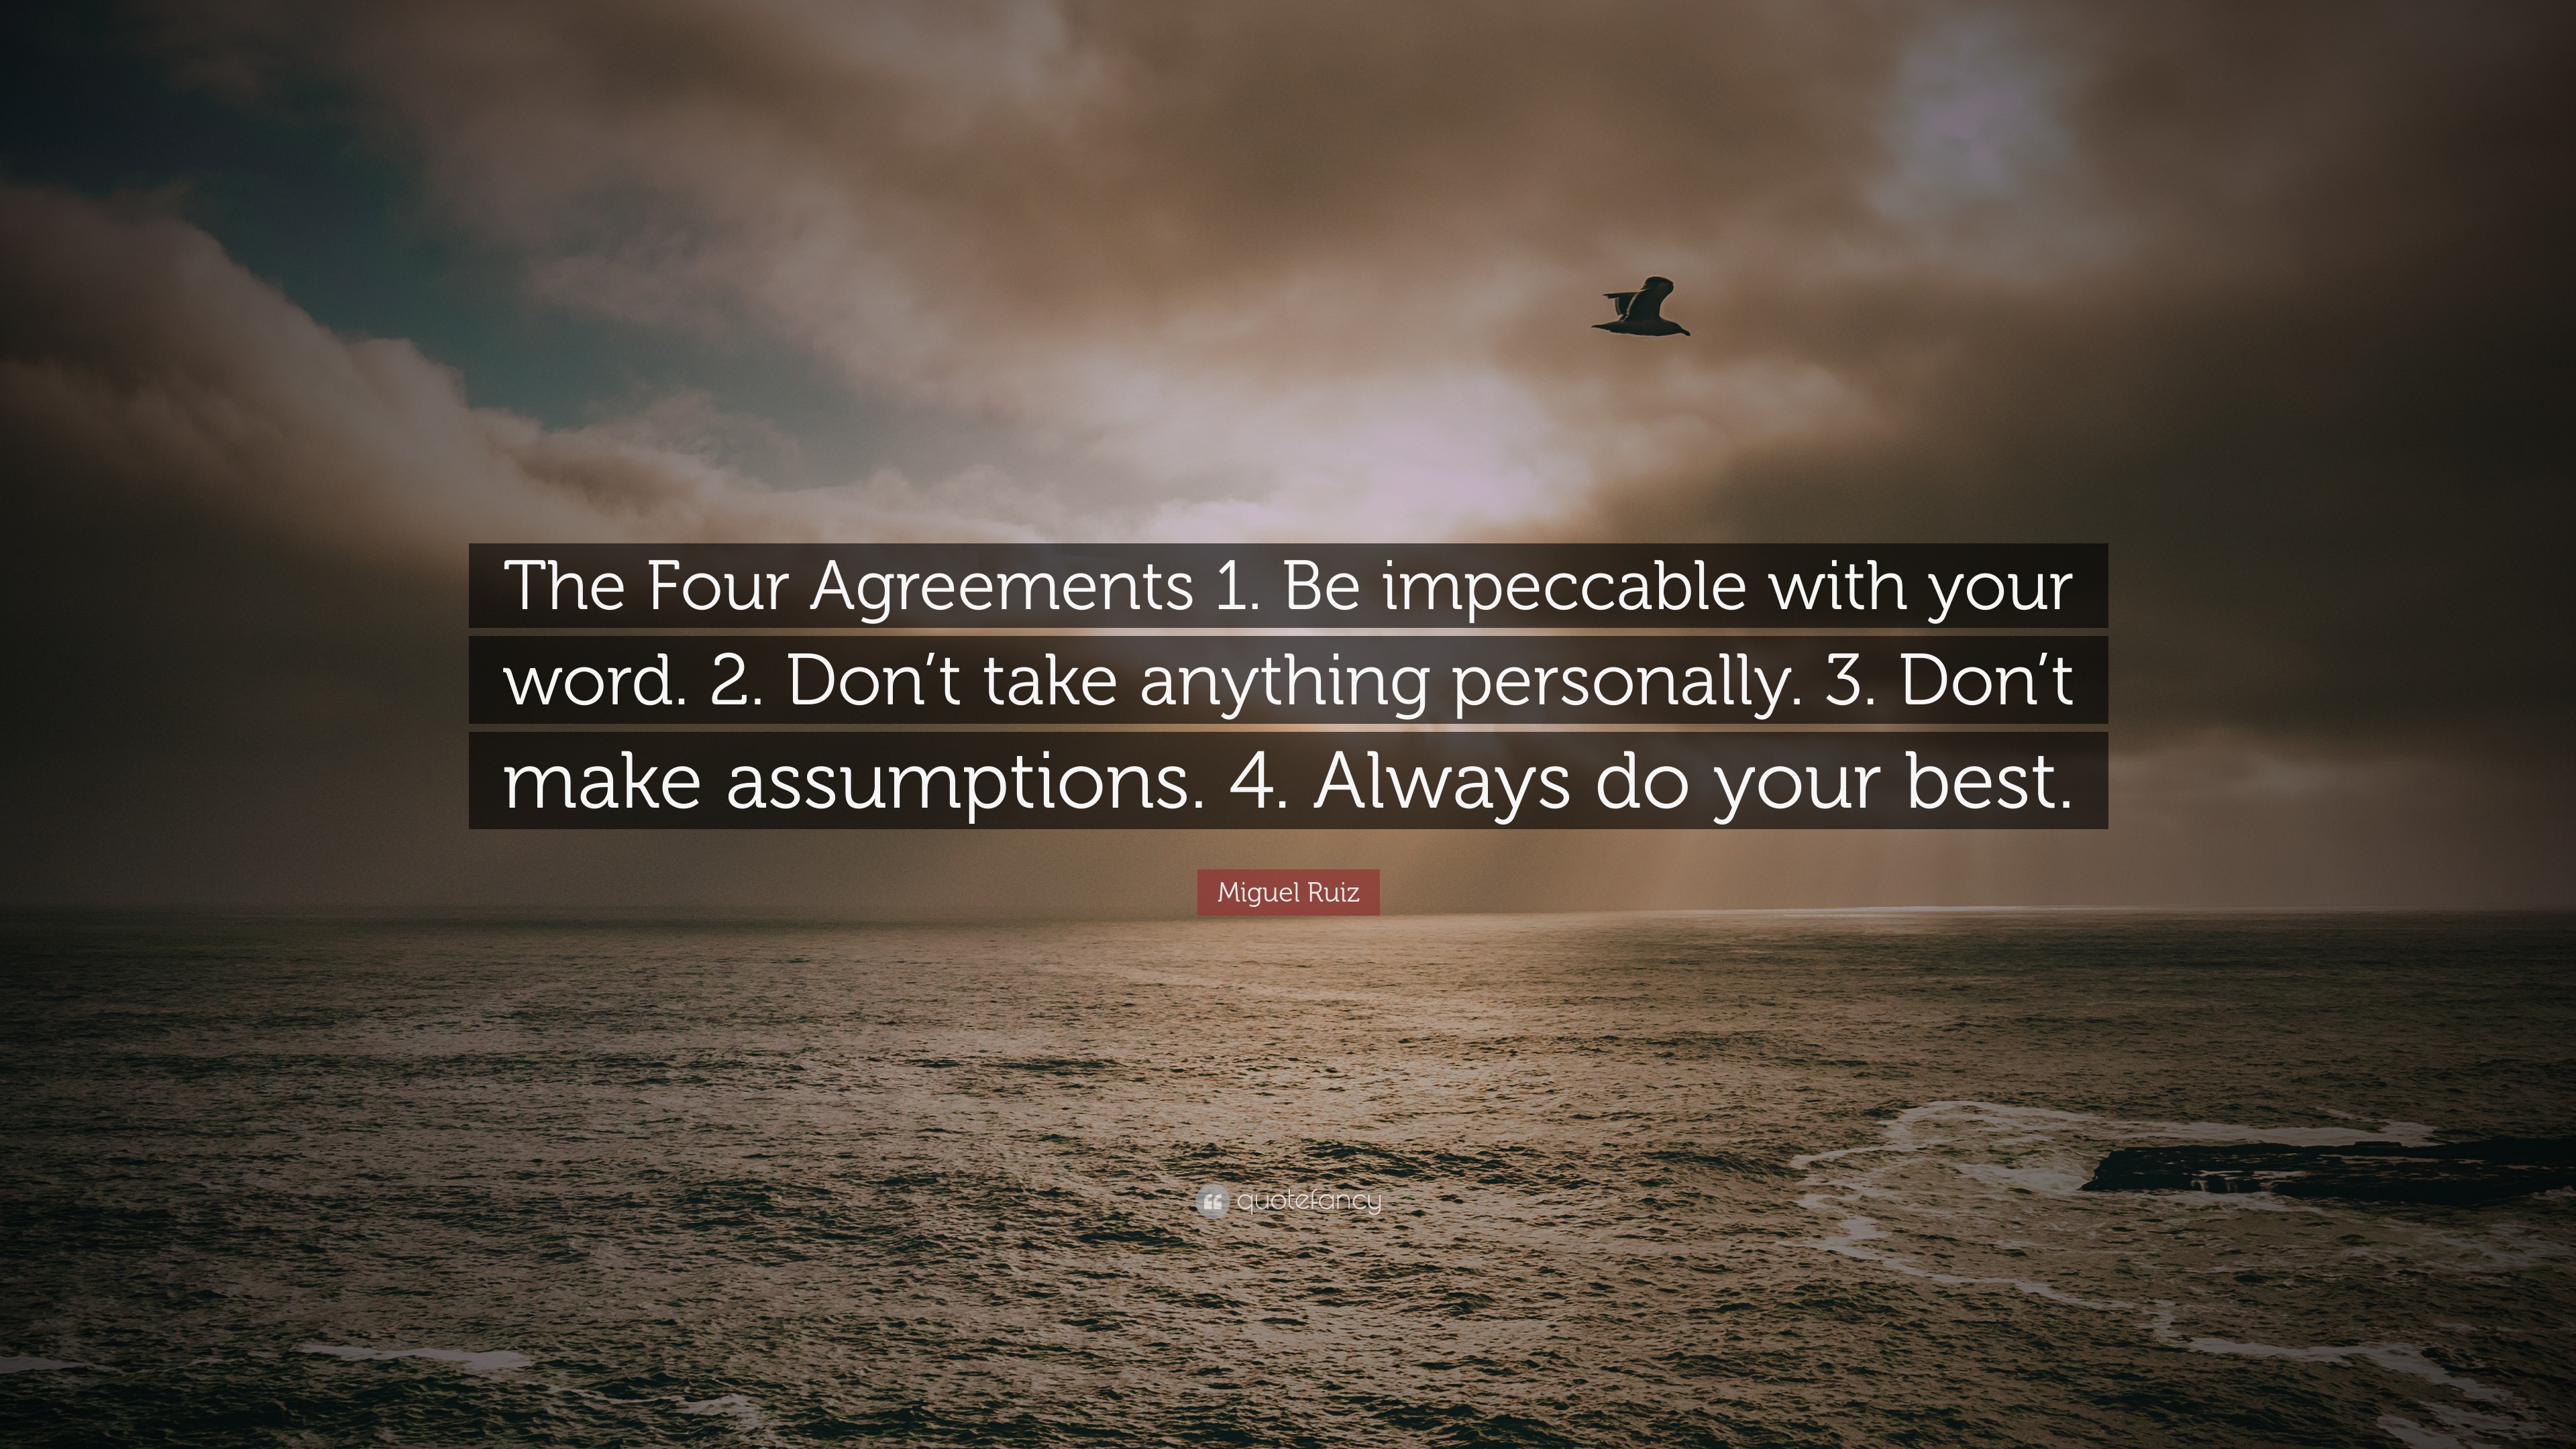 Miguel Ruiz Quote: “The Four Agreements 1. Be impeccable with your word